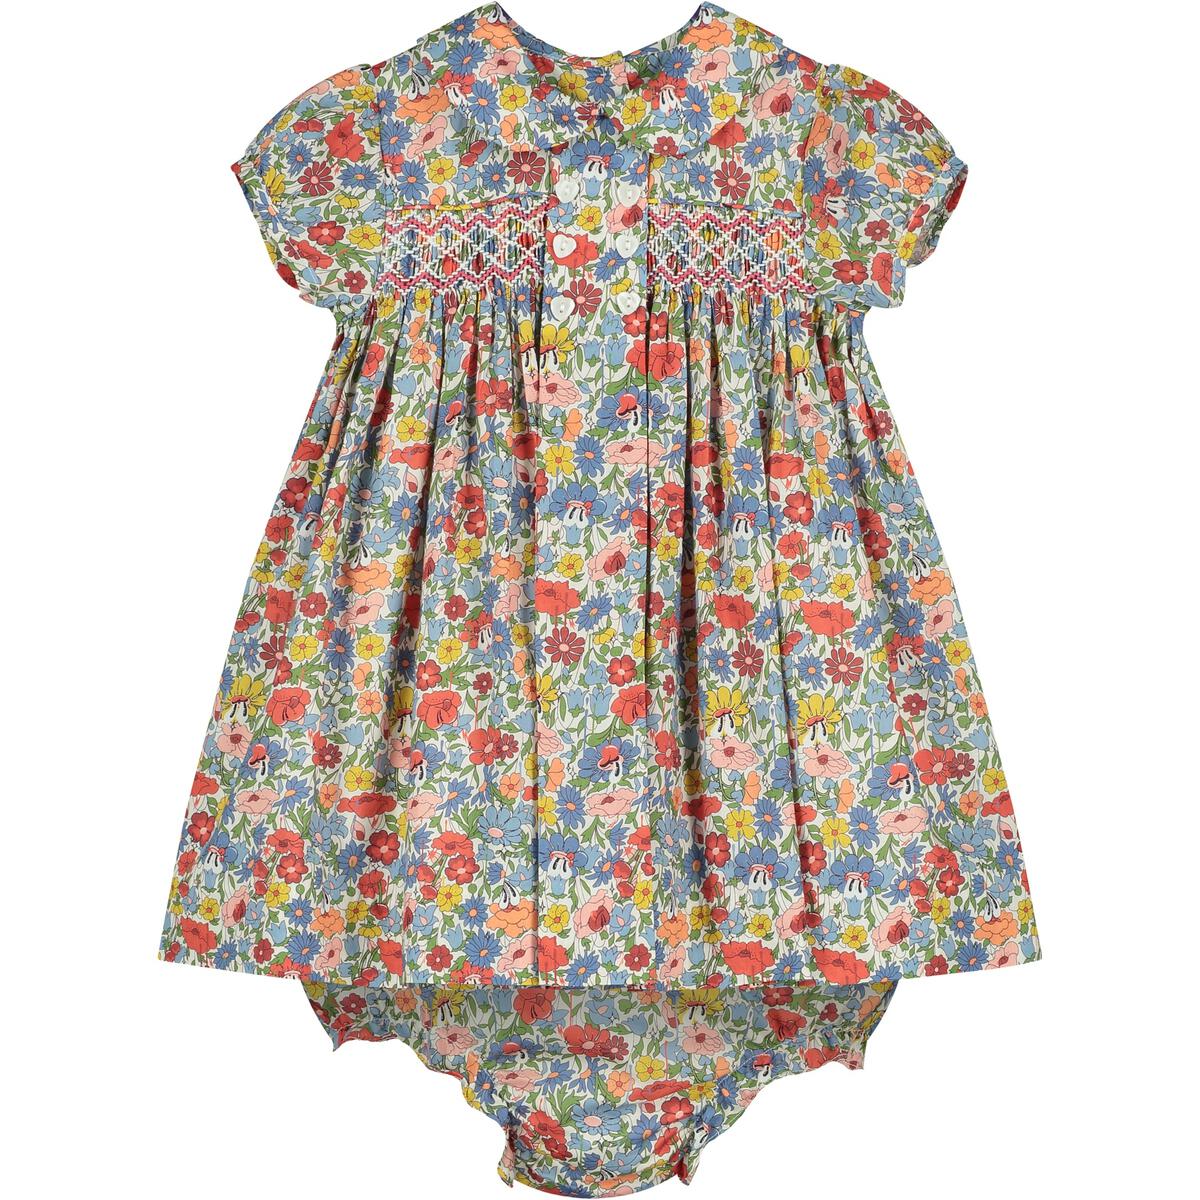 Eris Smocked Liberty Print Dress in a rich fall floral pattern with heart button accents. 